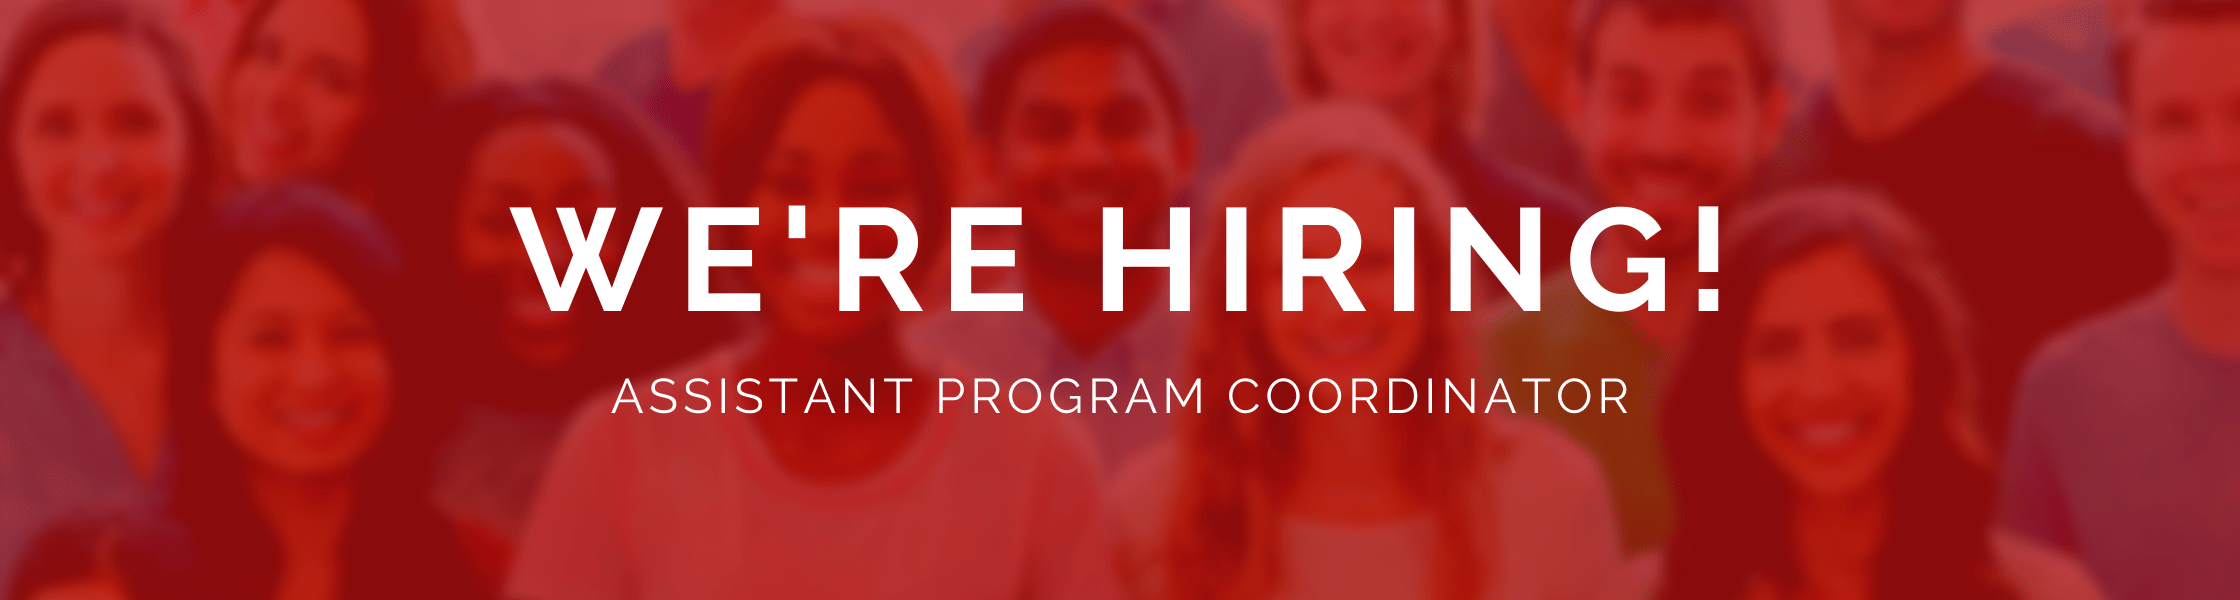 A red background with a multicultural group of people behind the words "We're hiring! Assistant Program Coordinator"